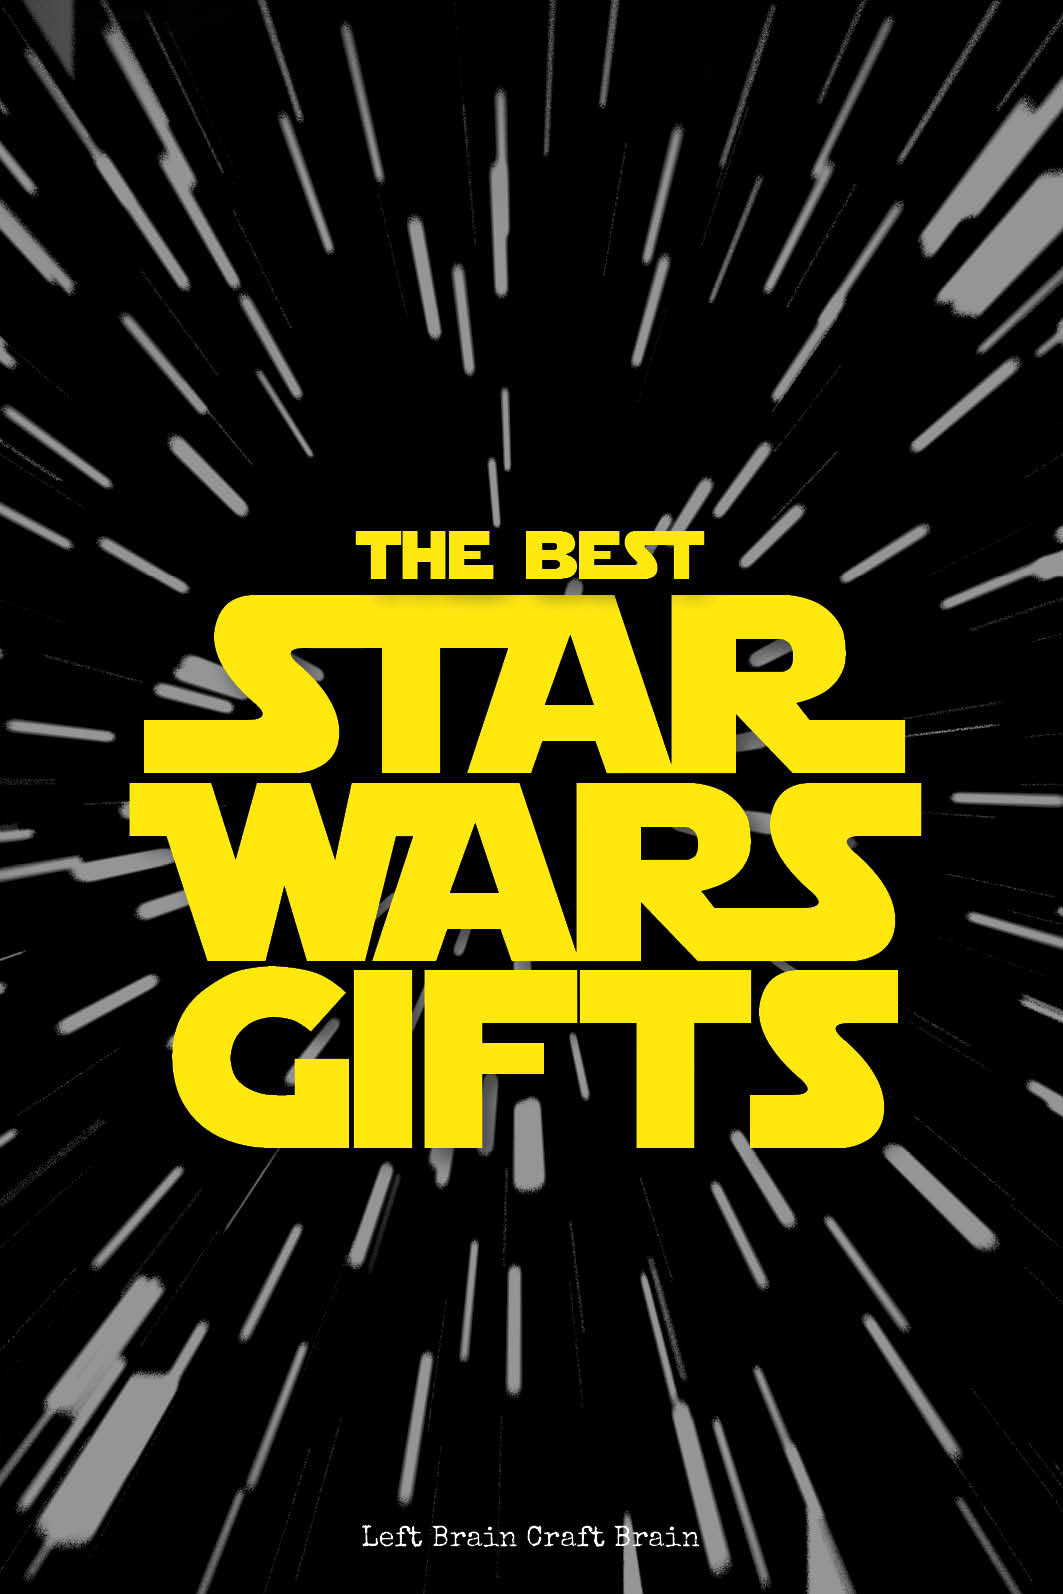 Star Wars fans will love getting a present from this huge list of the Best Star Wars Gifts. From Star Wars Lego to Star Wars games to Star Wars Toys and Star Wars Collectibles, this list has it all.